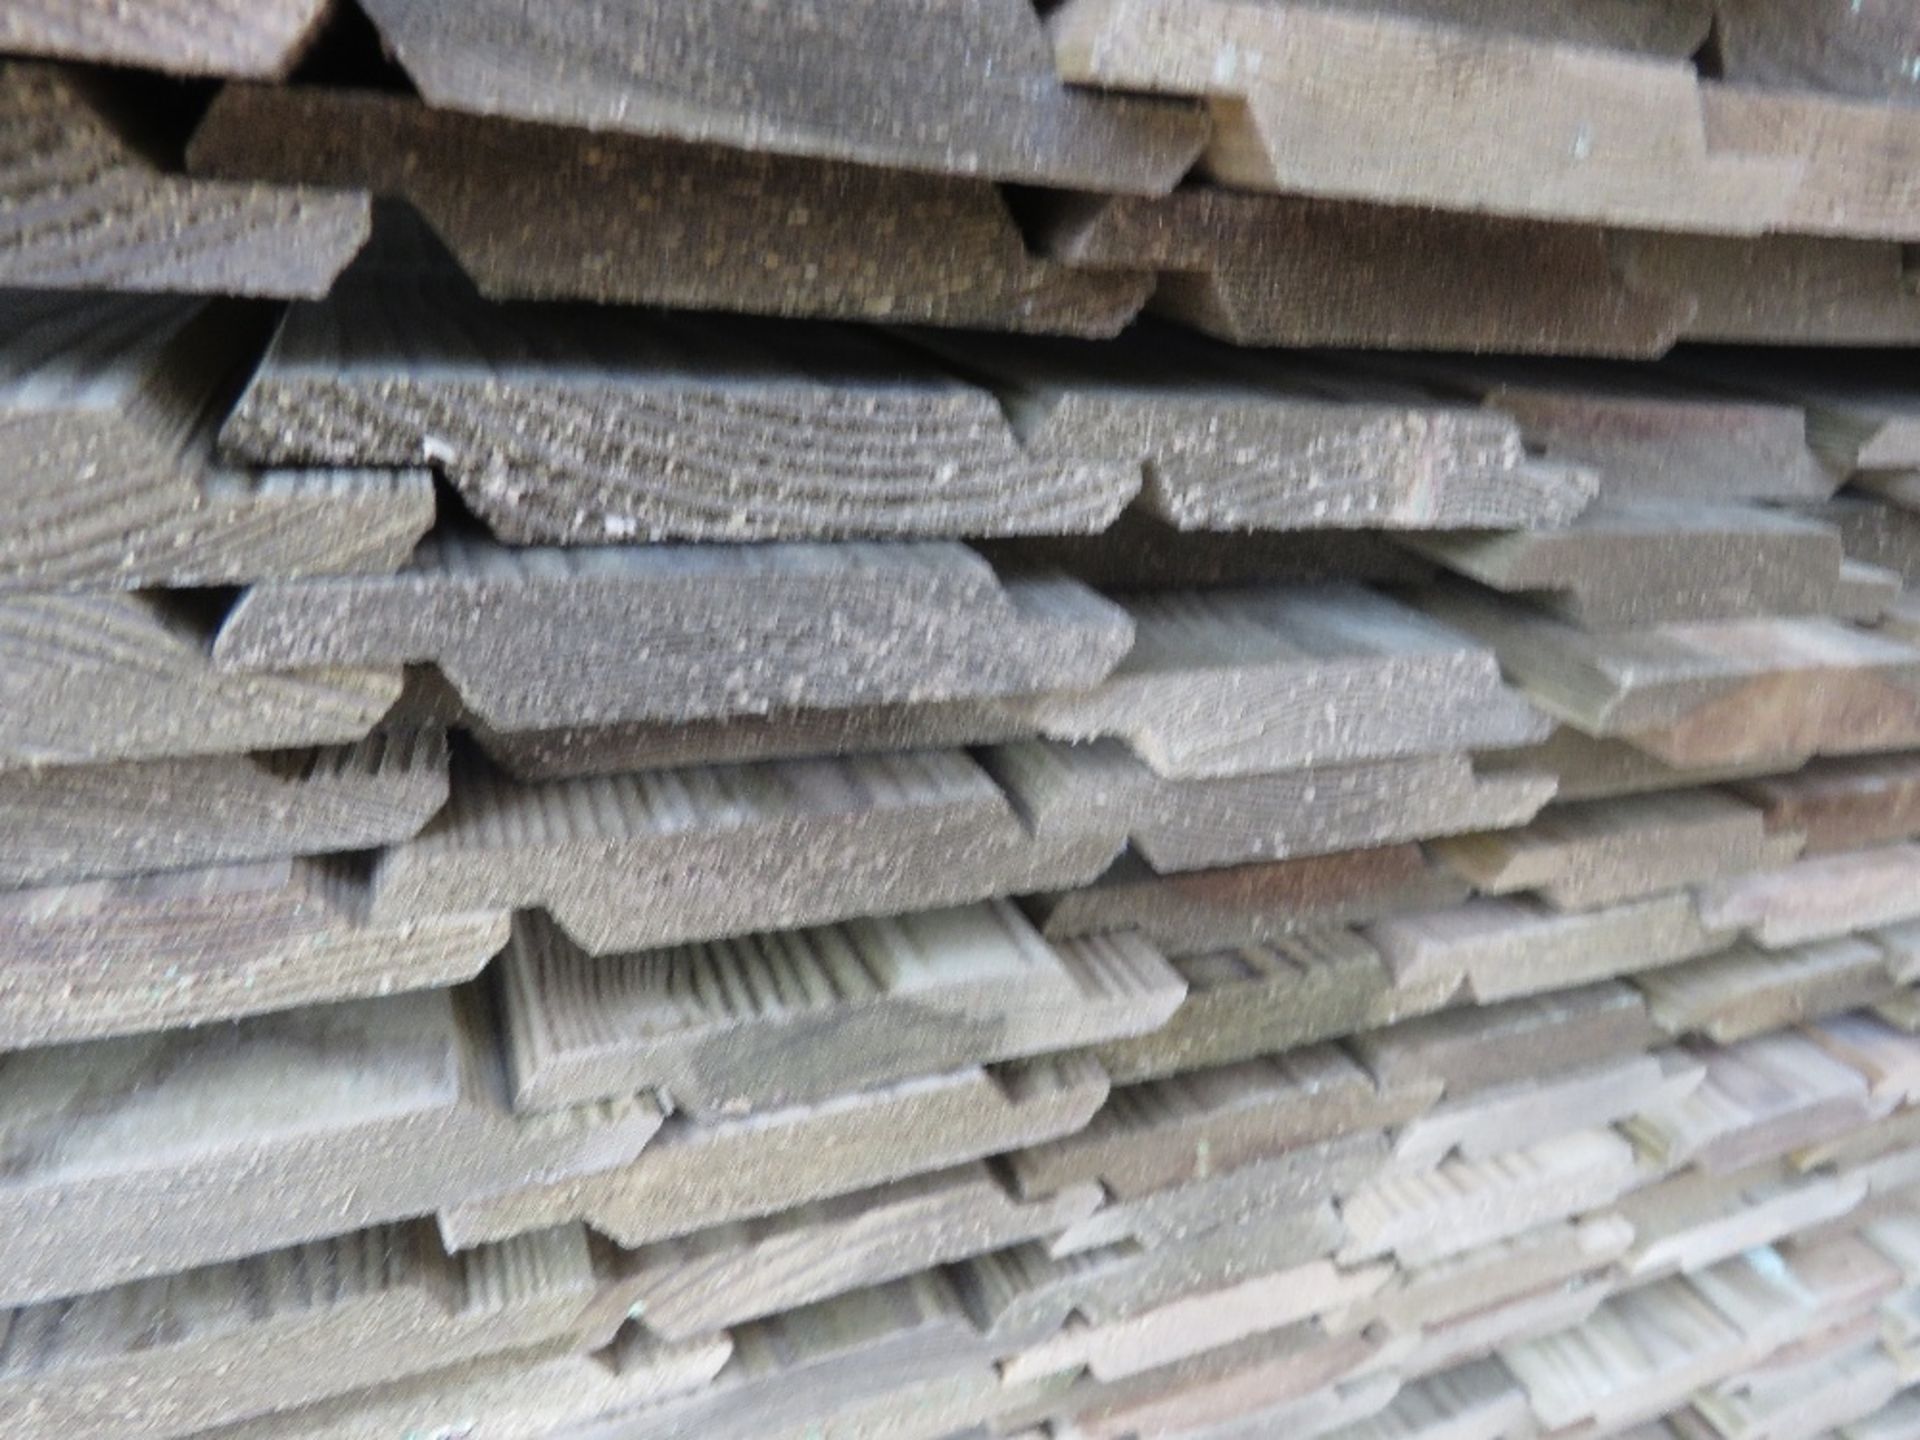 LARGE PACK OF PRESSURE TREATED SHIPLAP TYPE TIMBER CLADDING BOARDS. 1.73-1.93M LENGTH X 100MM WIDTH - Image 3 of 3